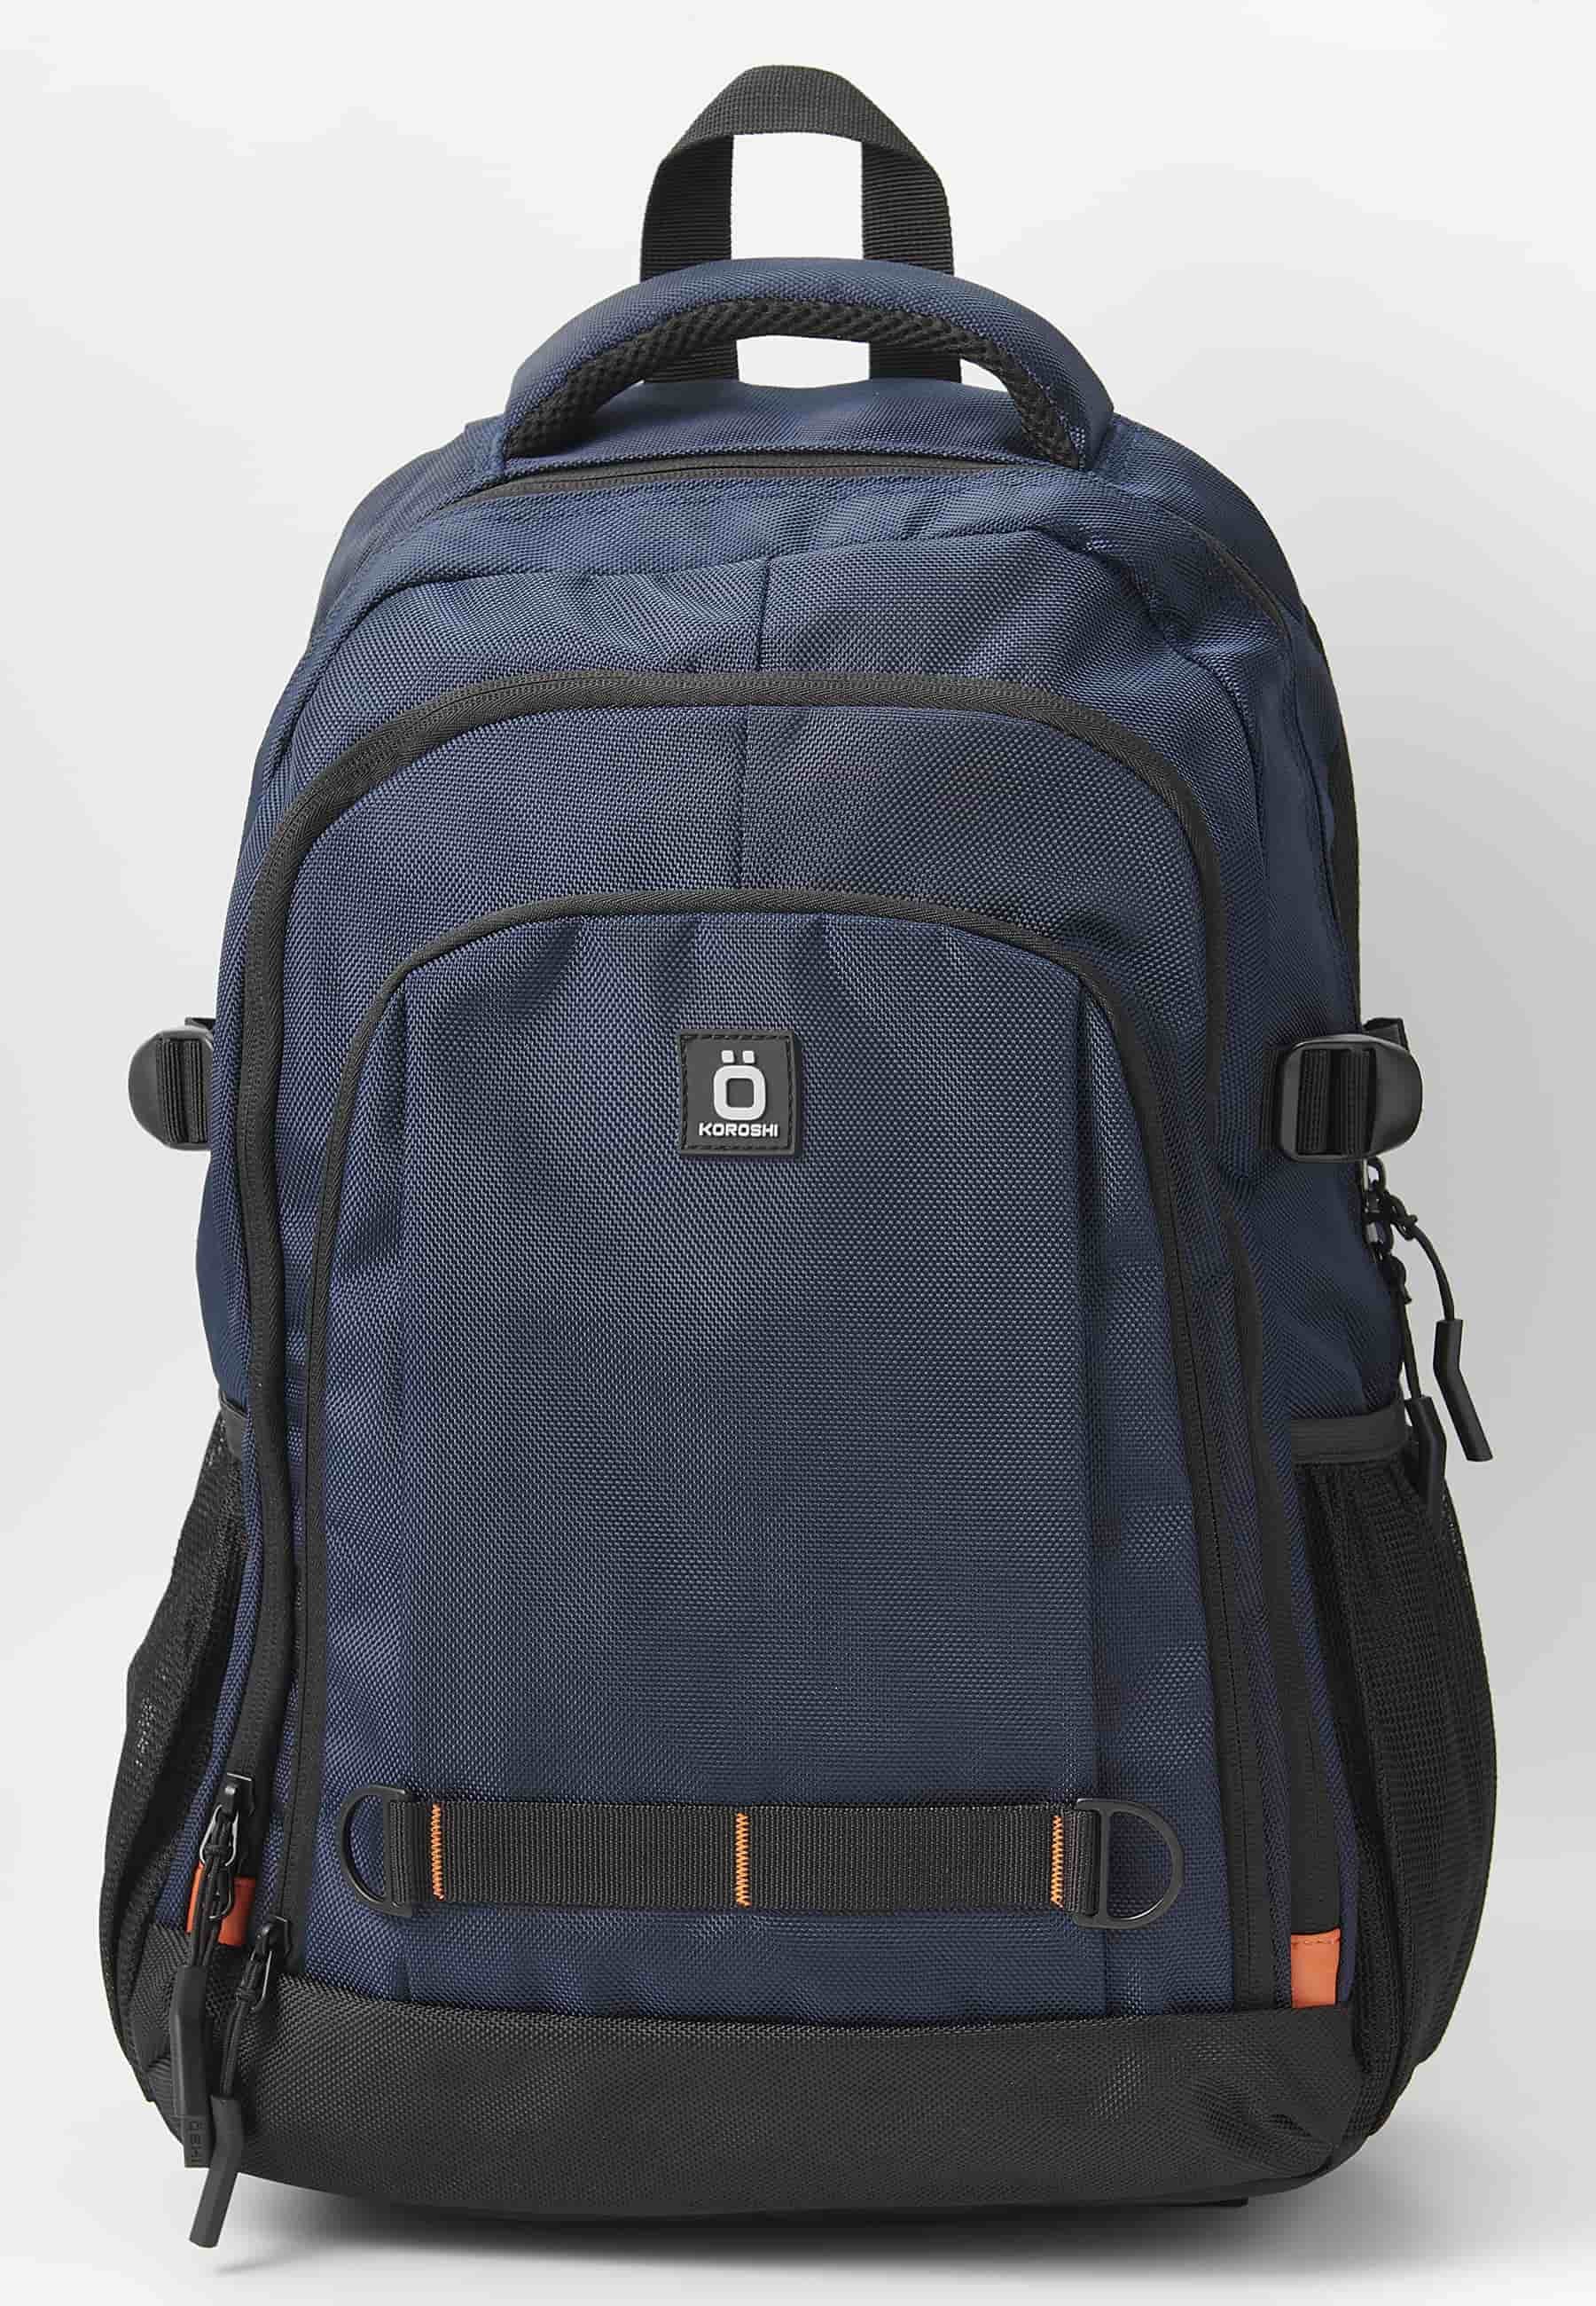 Koröshi backpack with three zippered compartments, one for a laptop, with Navy interior pockets